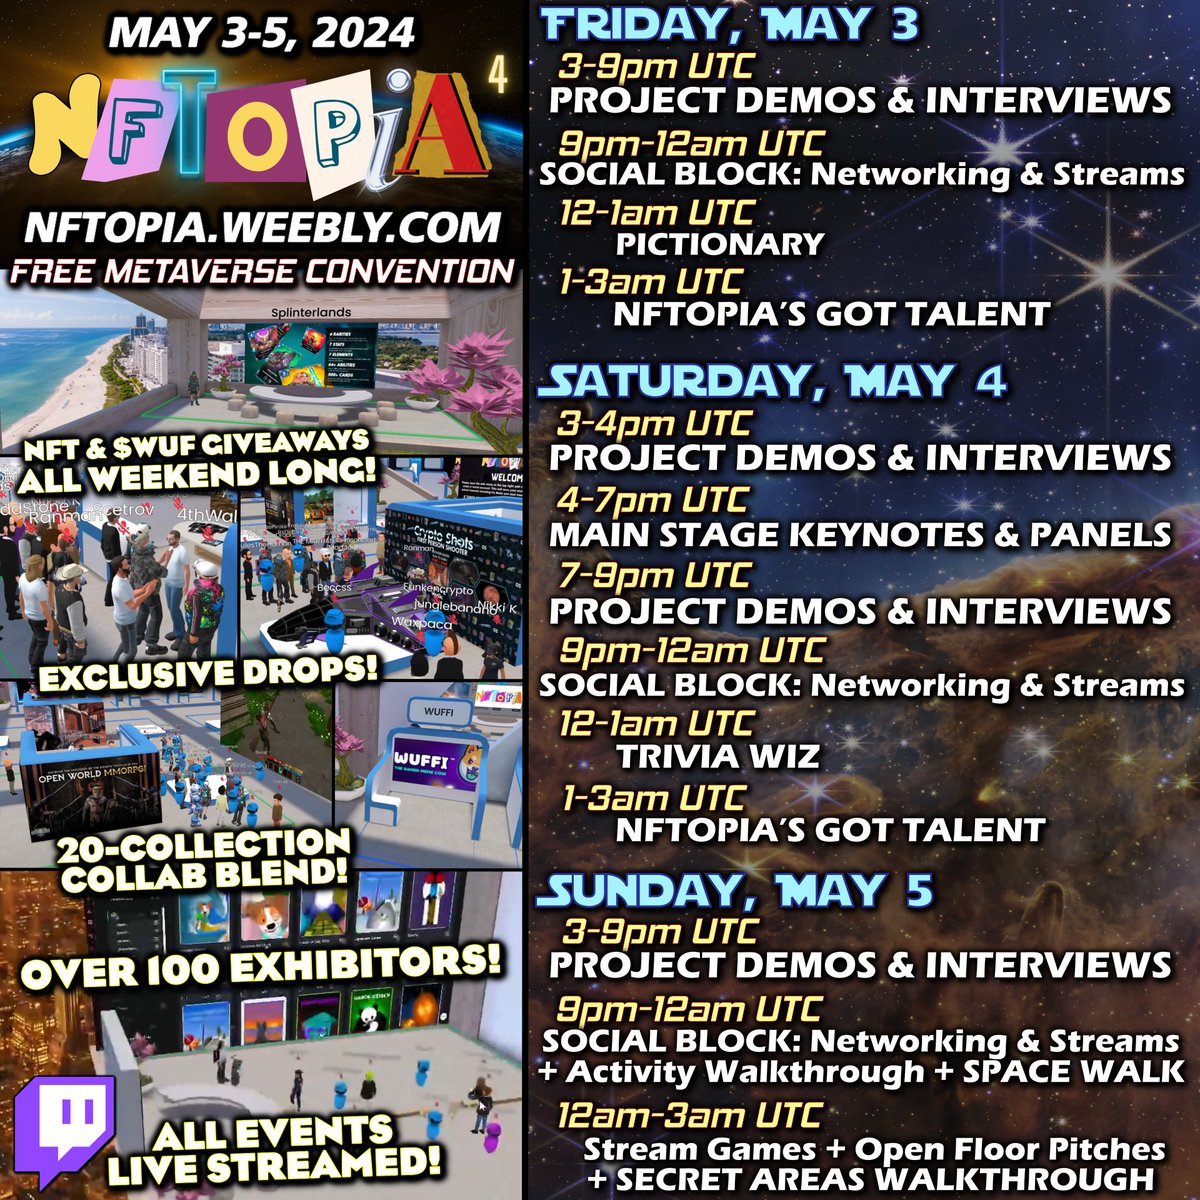 🚀DAY 2: NFTOPIA Exciting Online Convention! JOIN US! ENTER HERE: framevr.io/nftopia4 AMAZING EXHIBITORS! EPIC @bountyblok with WAXNFT & $WUF prizes at SWAG Giveaway Booth! @OriginalFunko Premium Packs Giveaway Booths in all 3 Halls & Drops Gallery! FREE to attend!…